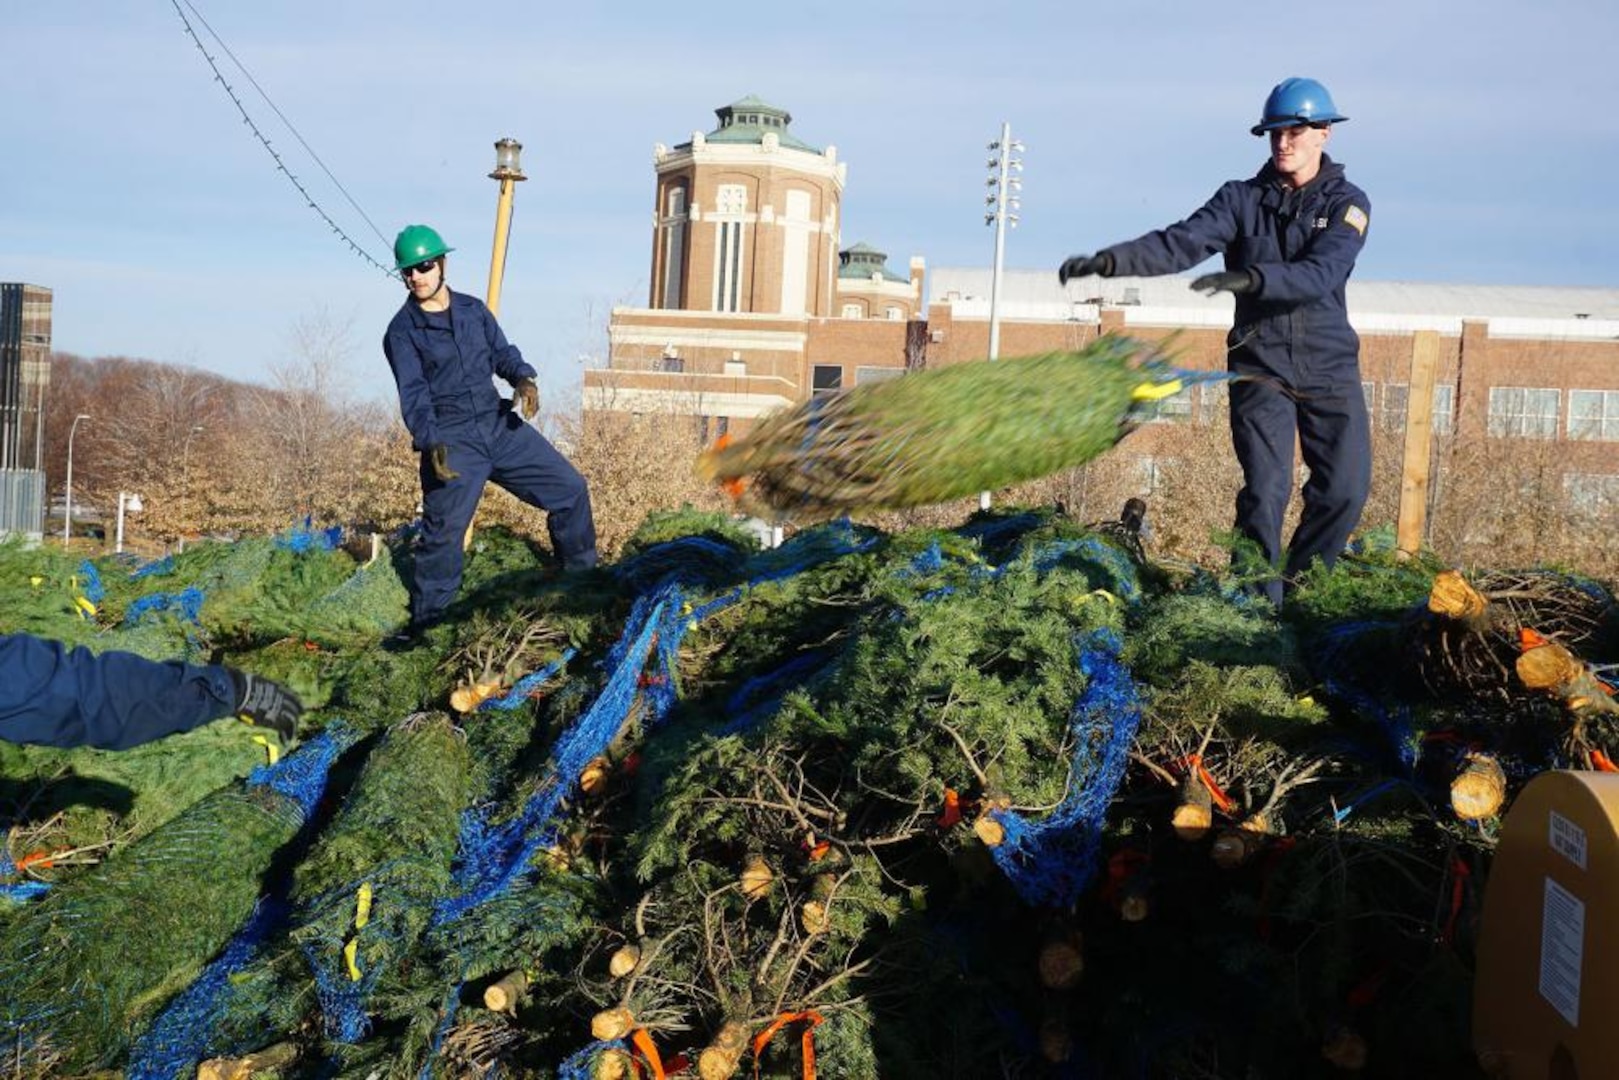 Crew members aboard Coast Guard Cutter Mackinaw unload donated Christmas trees from a pile on the ship's fantail at Chicago's Navy Pier Saturday, Dec. 4, 2021. The trees are among 1,200 bound for Chicago families that otherwise wouldn't have one, thanks to the 22nd annual Chicago's Christmas Ship celebration. U.S. Coast Guard photo by Brian Hinton, U.S. Coast Guard Auxiliary.